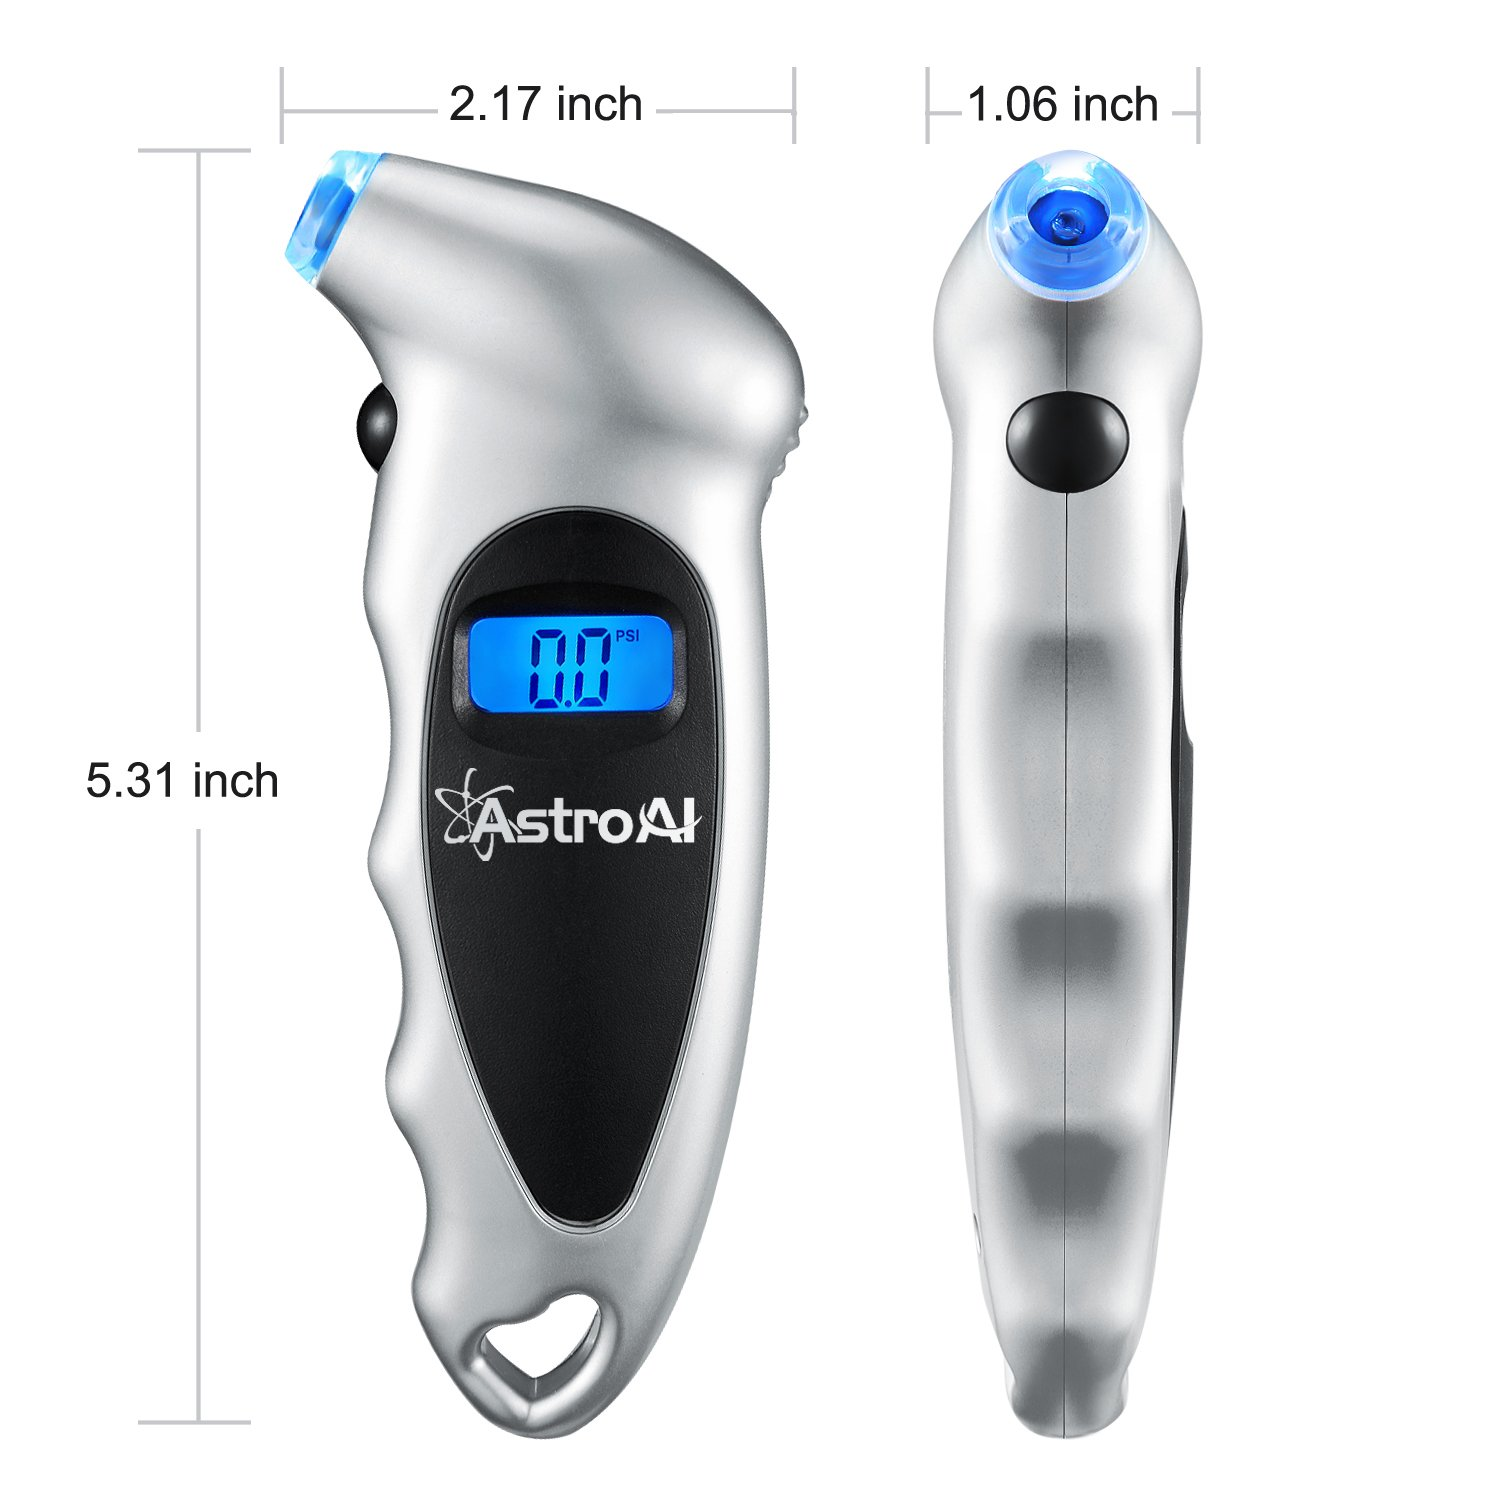 Digital Tire Pressure Gauge 150 PSI 4 Settings for Car Truck Bicycle with Backlit LCD and Non-Slip Grip, Silver (1 Pack)